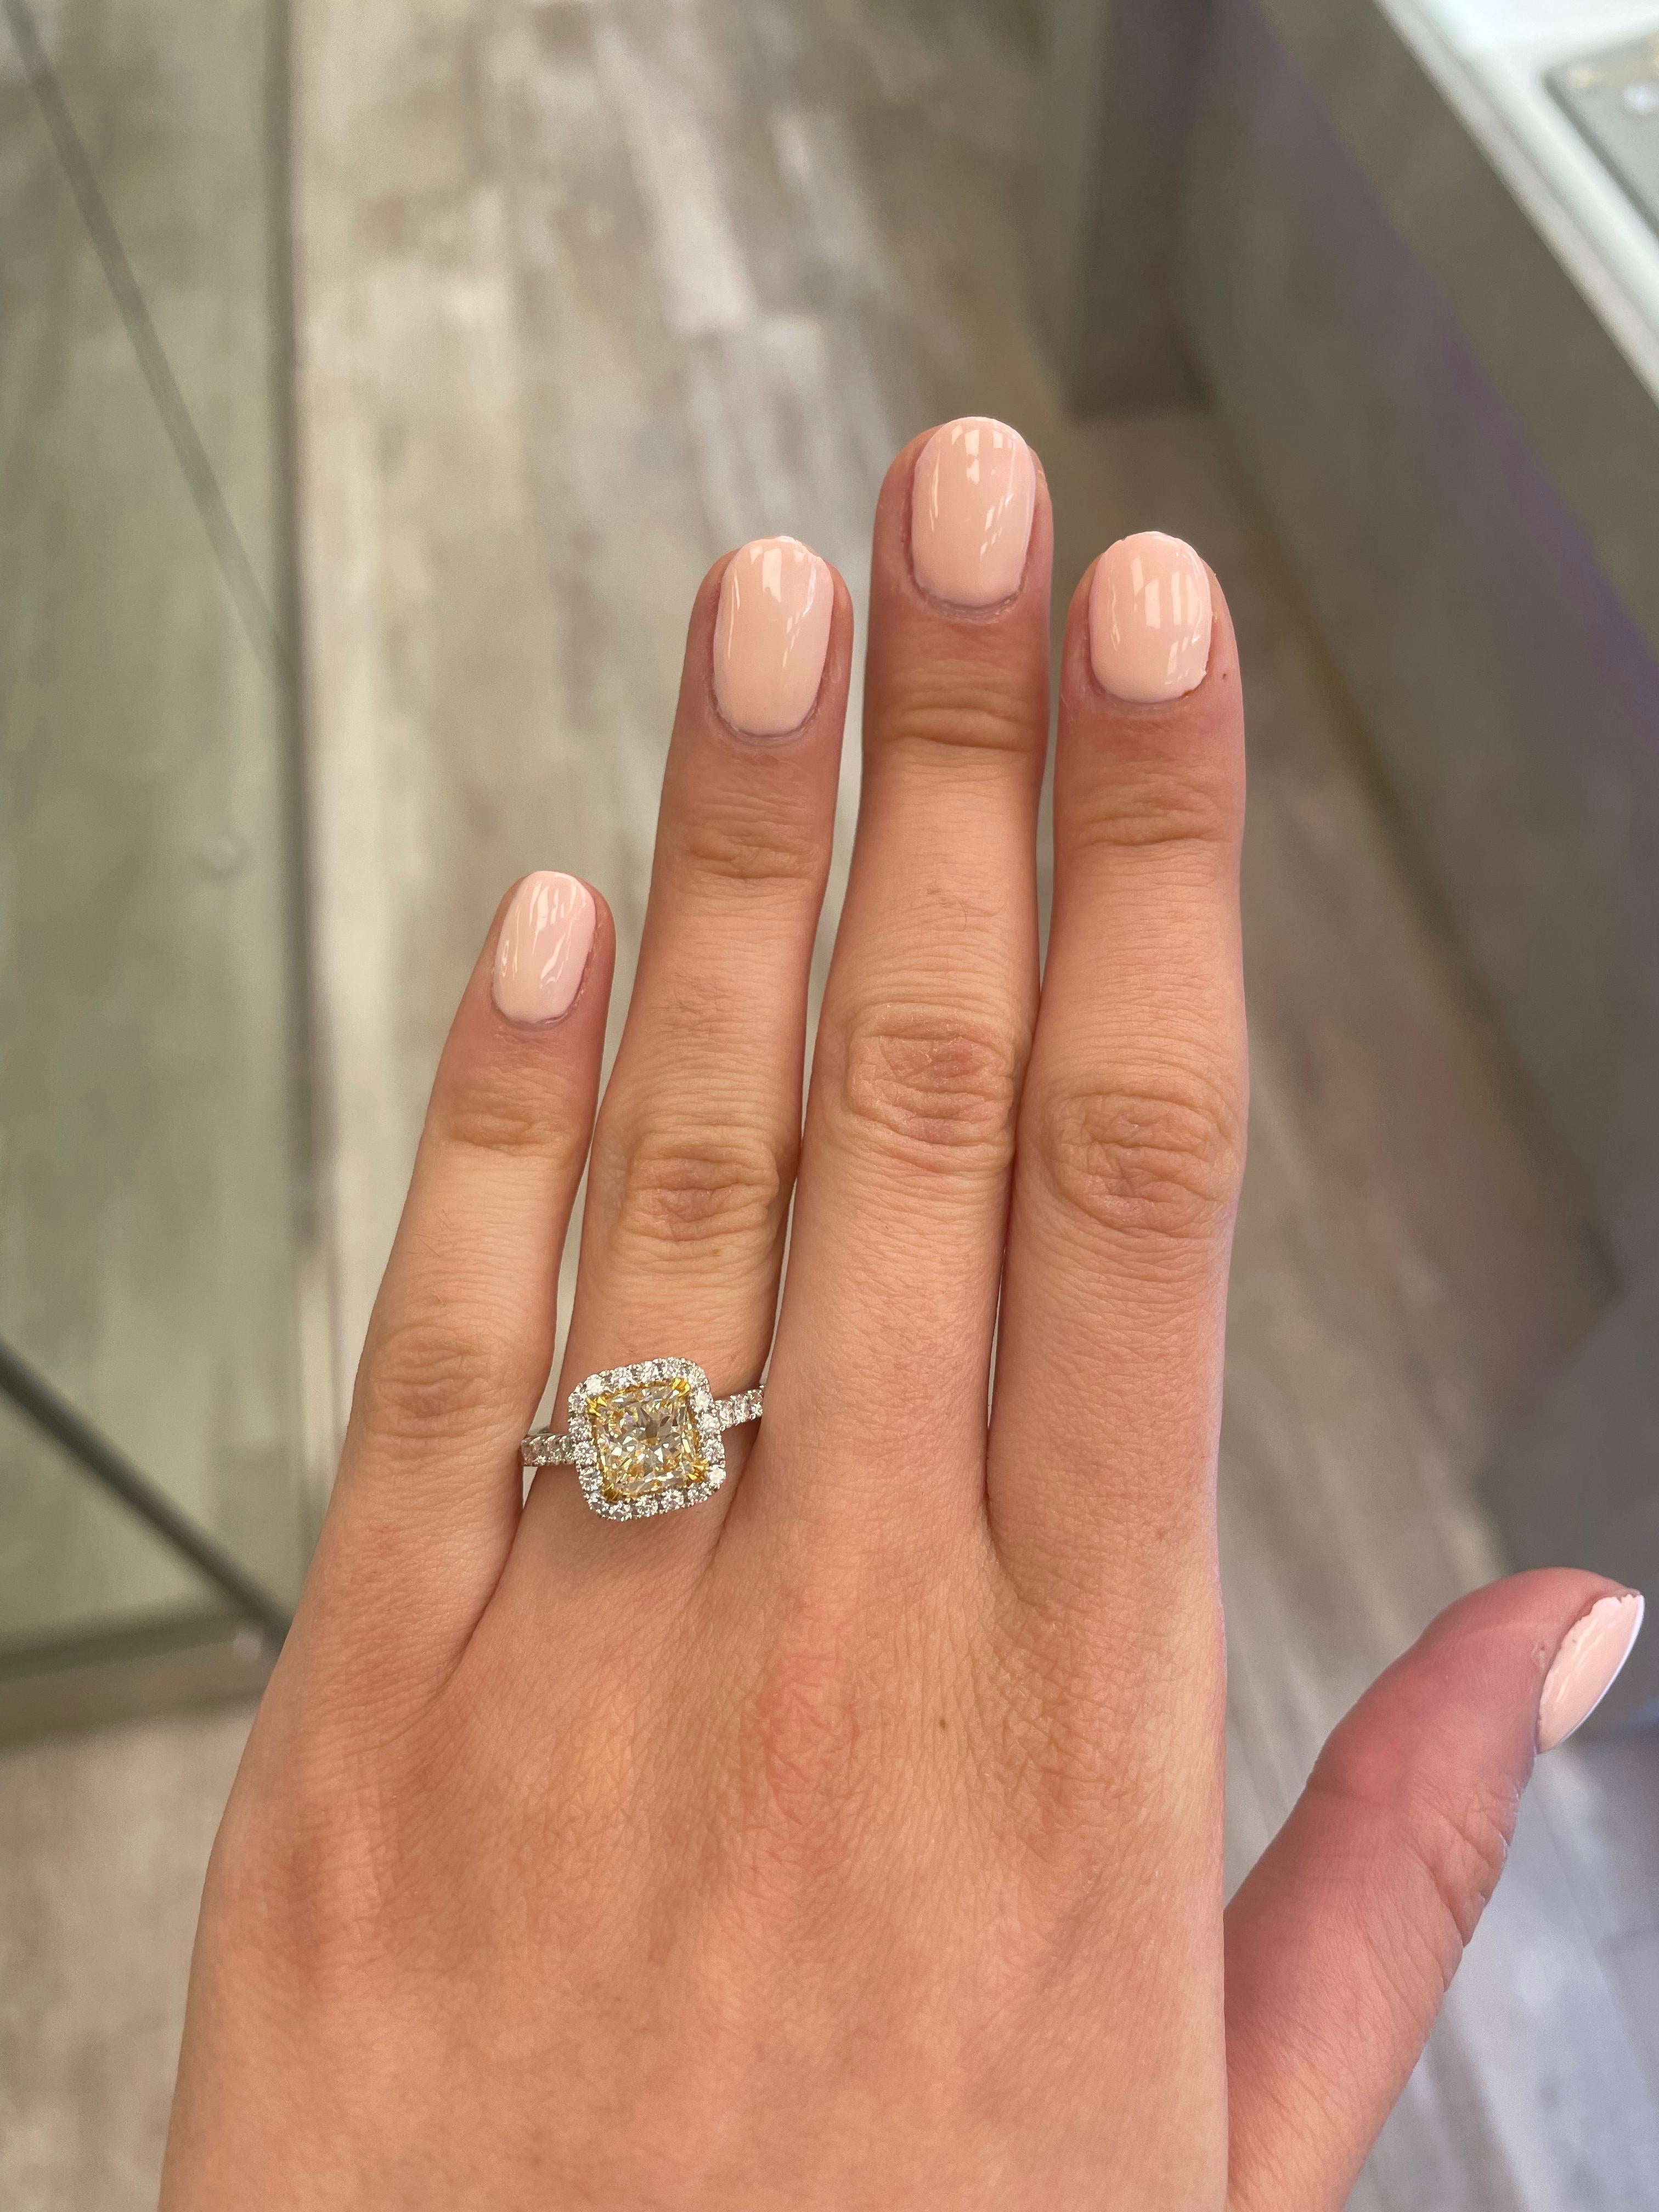 Stunning modern EGL certified yellow diamond with halo ring, two-tone 18k yellow and white gold. By Alexander Beverly Hills
2.27 carats total diamond weight.
1.58 carat cushion cut Fancy Light Yellow color and VVS2 clarity diamond, EGL graded.